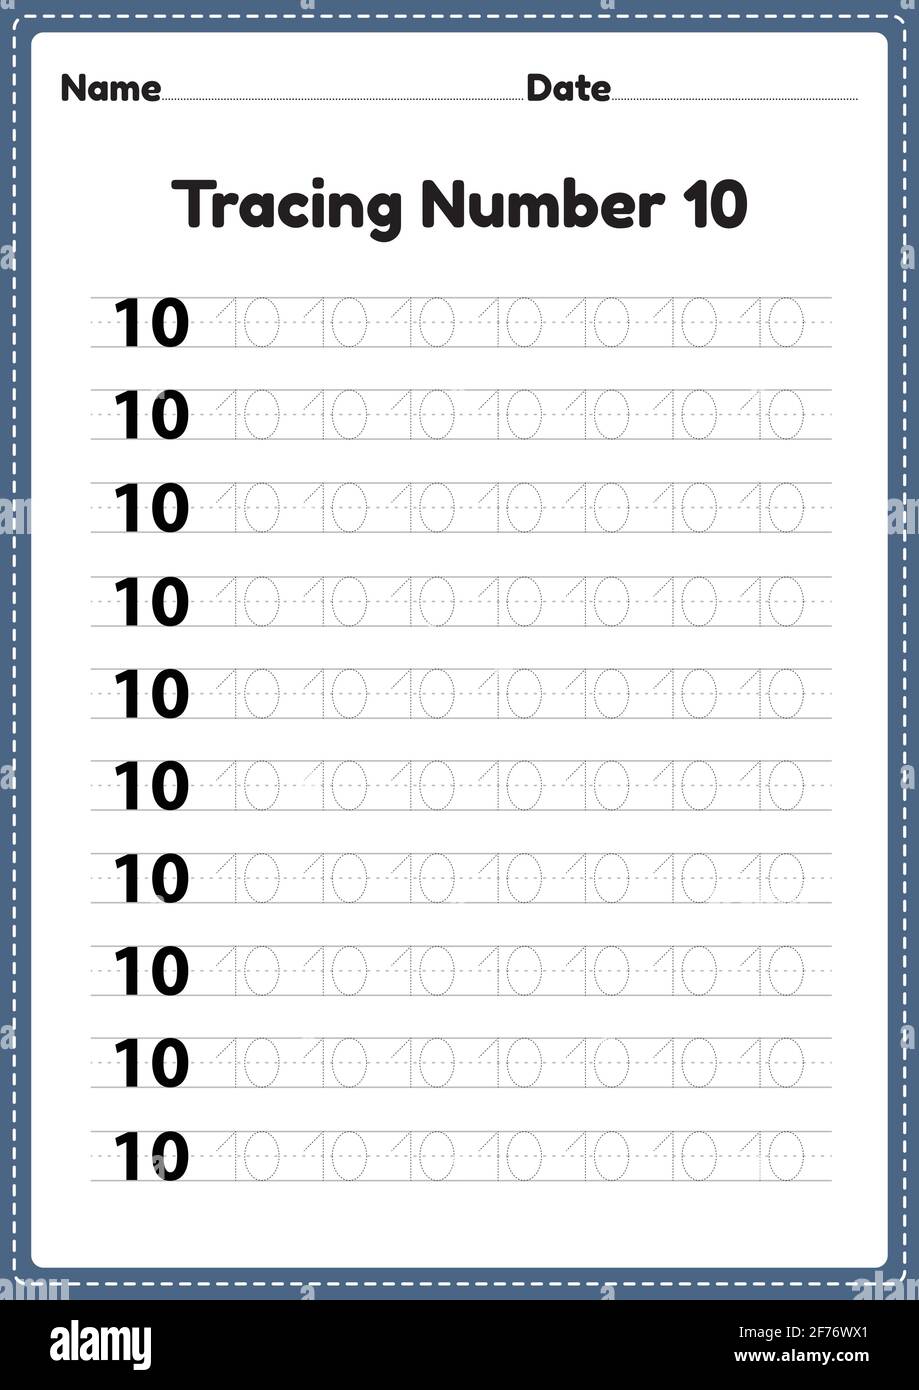 Tracing number 10 worksheet for kindergarten and preschool kids for educational handwriting practice in a printable page. Stock Vector